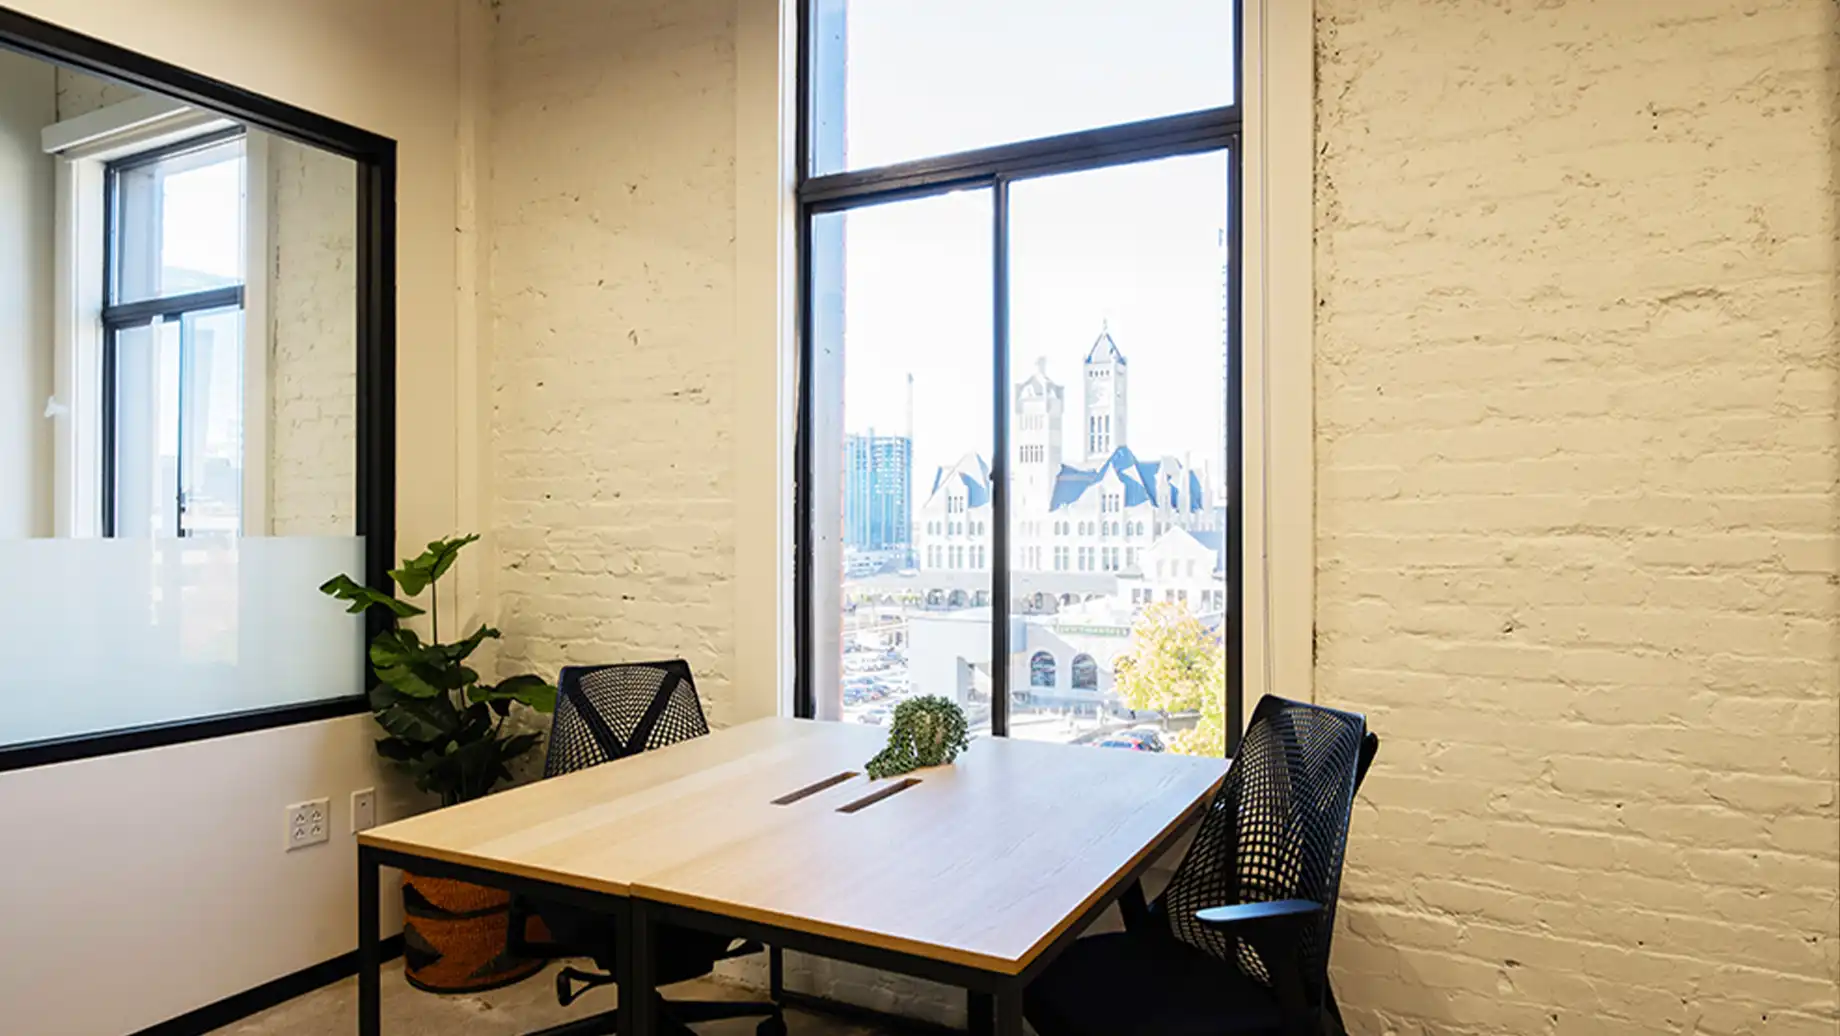 Private Office, The Gulch Nashville Office Space & Coworking Space